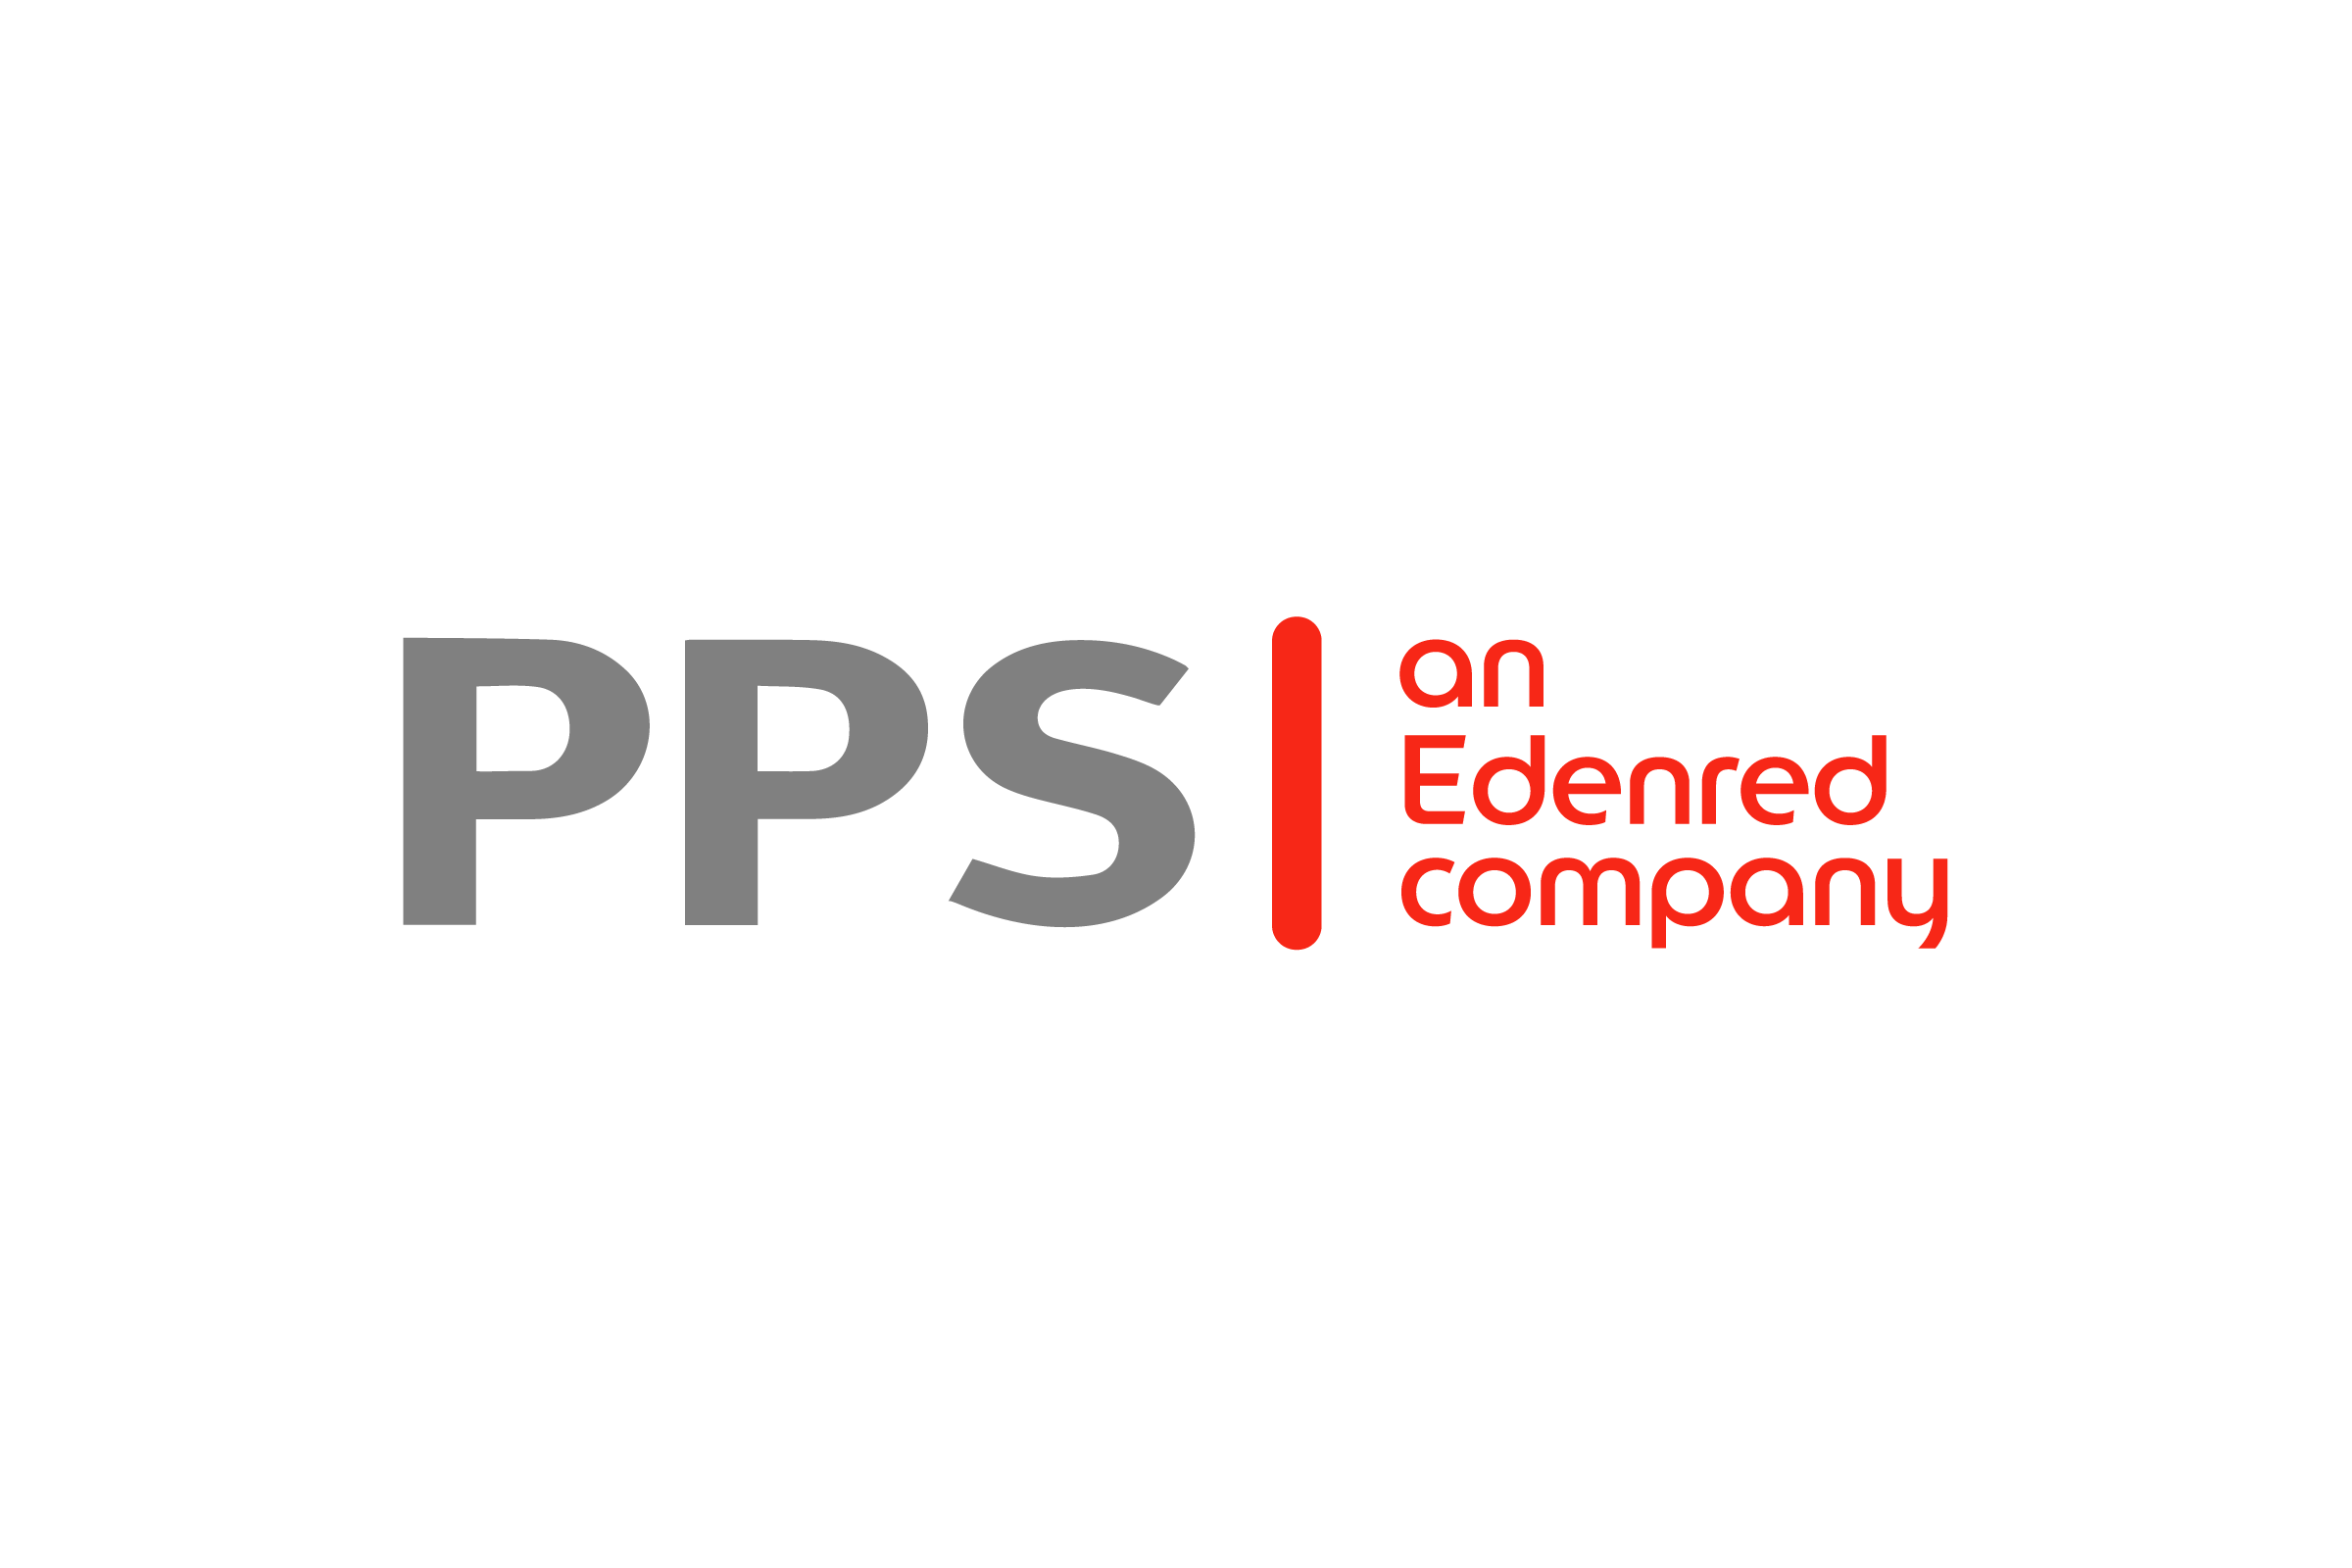 PPS Powers Suits Me – the Personal Account for Everyone